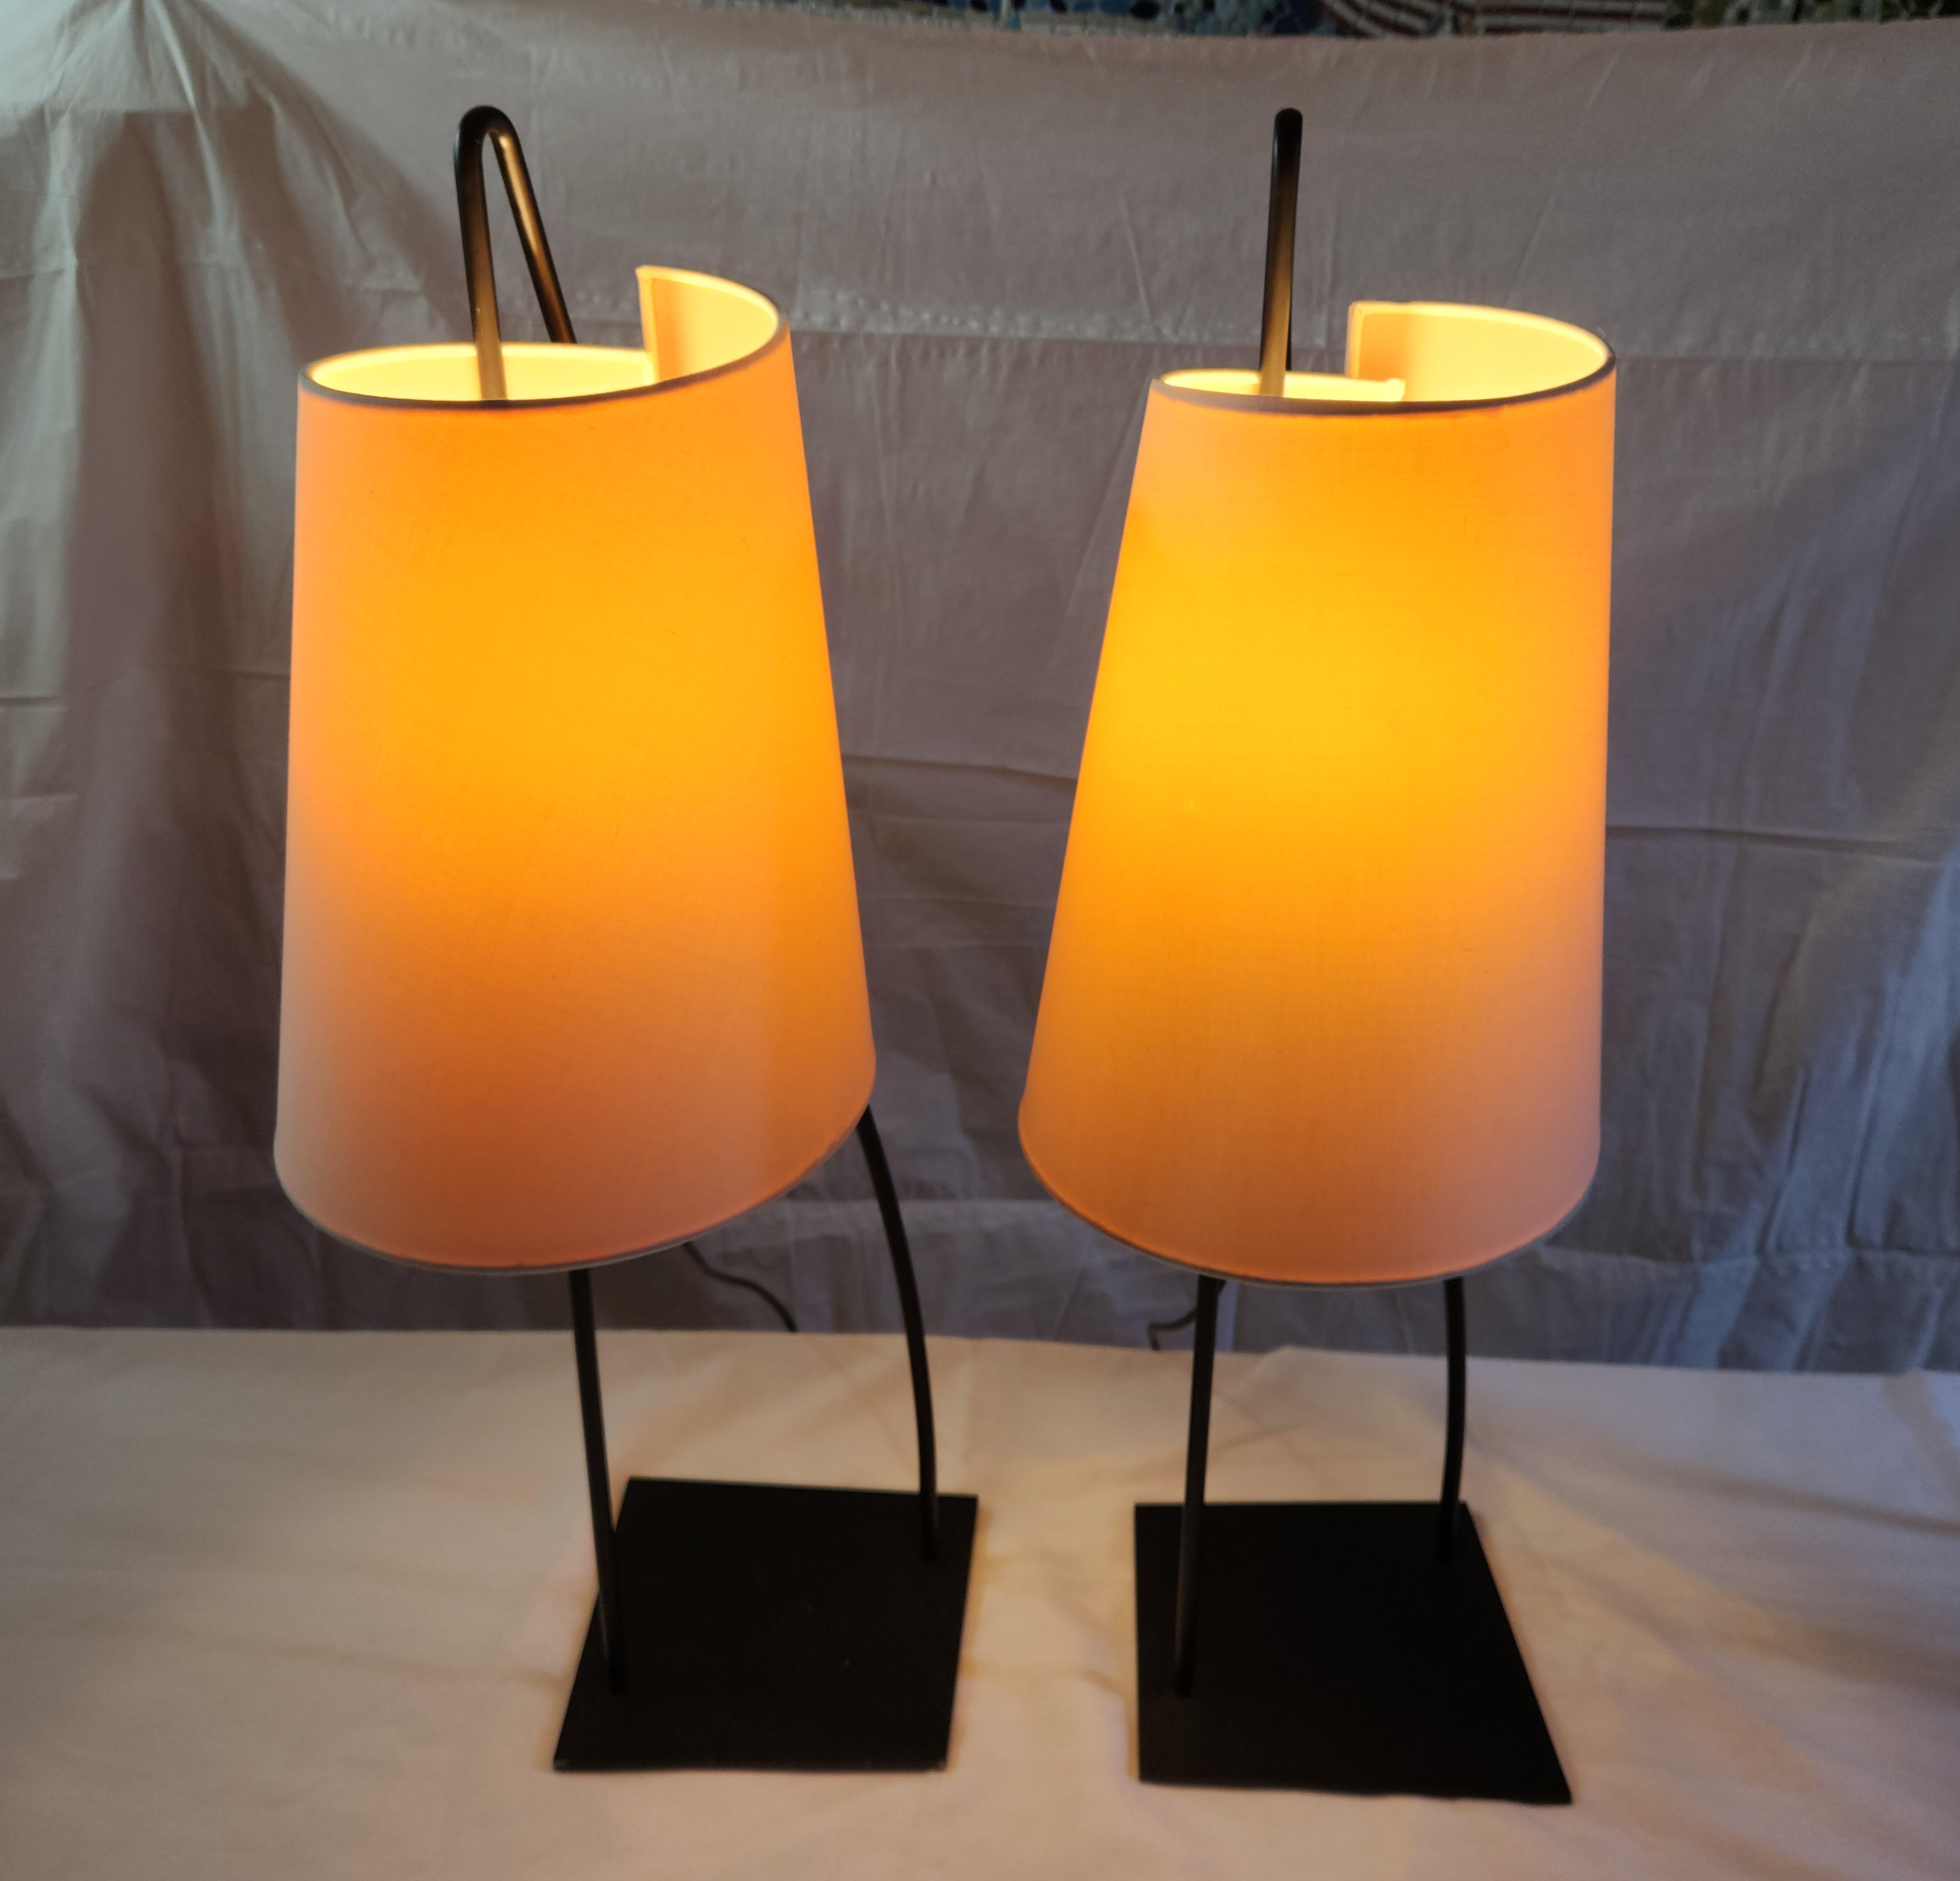 Steel Pair of Italiana Luce Black Rod Table Lamp, Italy, 1980s For Sale